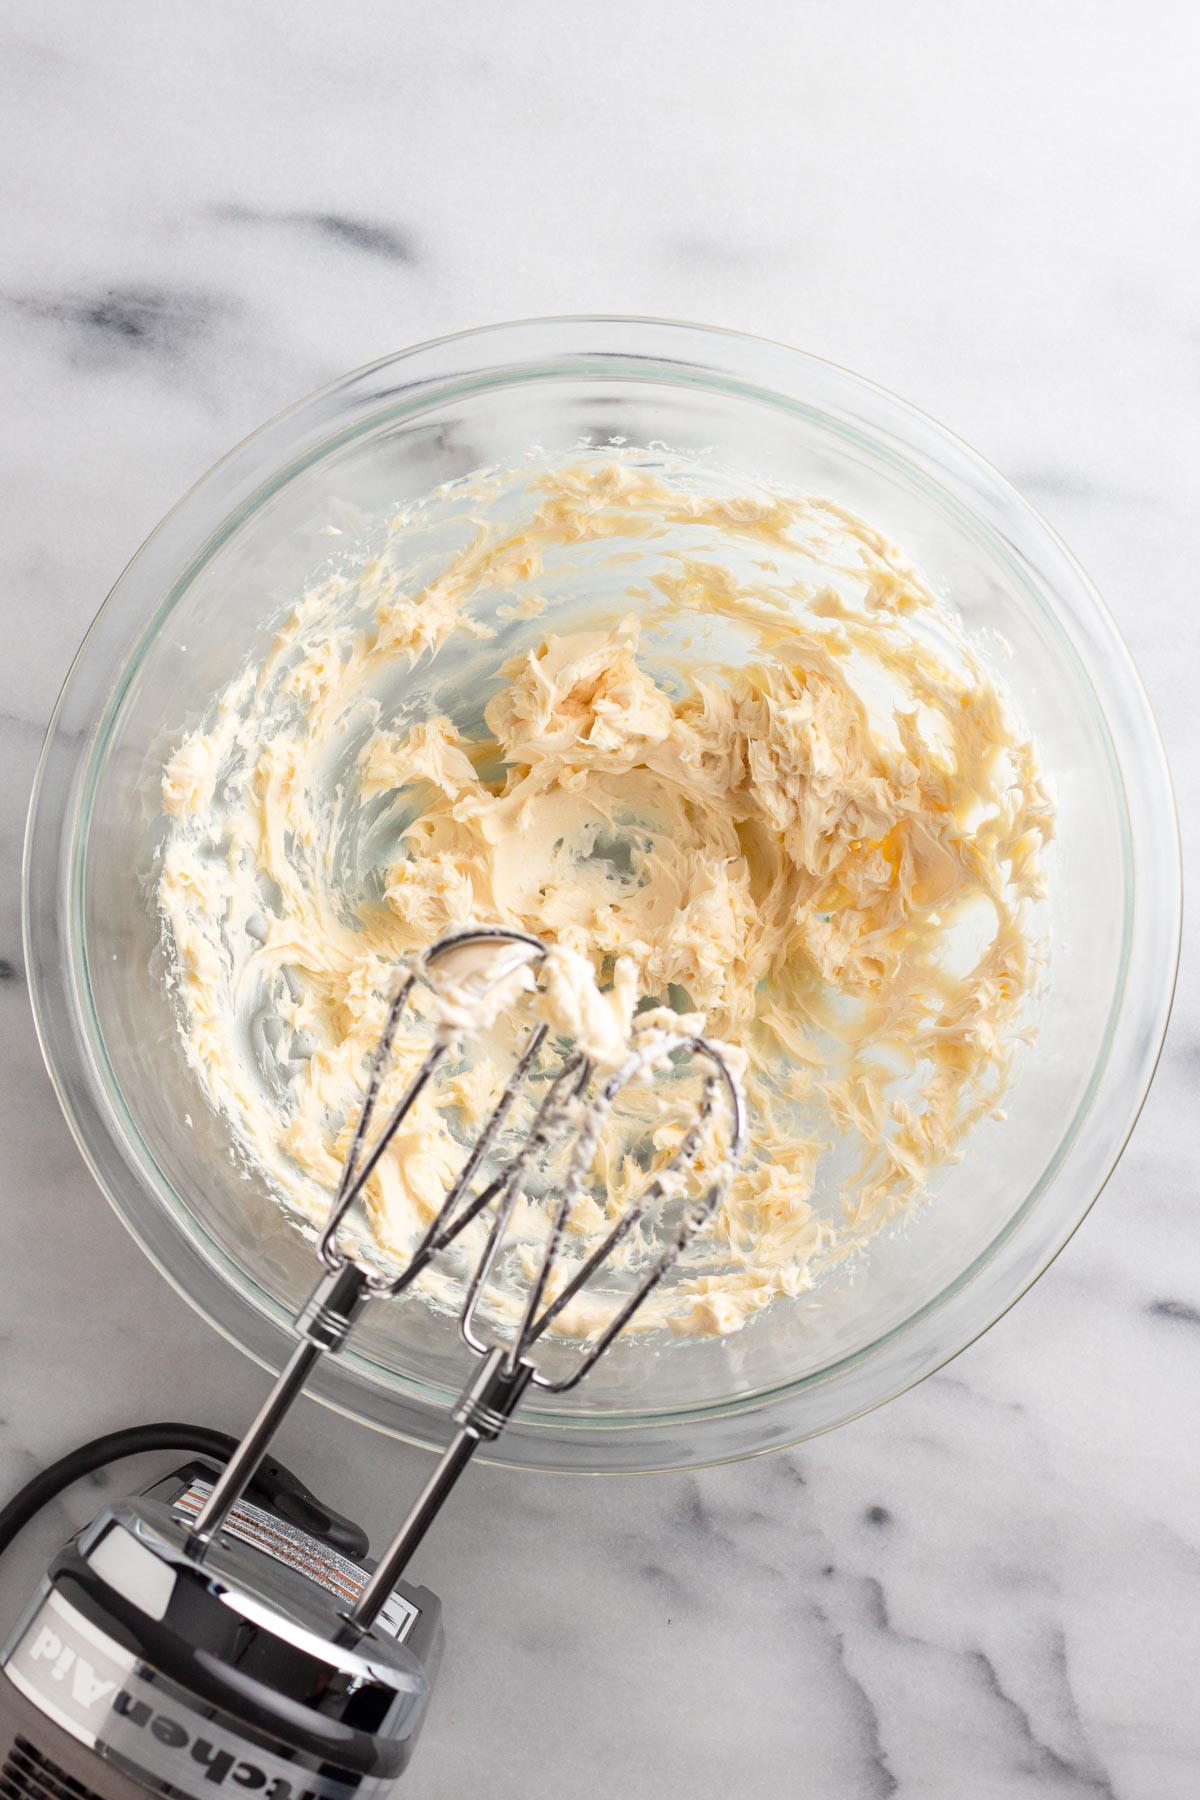 Butter, vanilla, and salt beaten together in a glass mixing bowl.